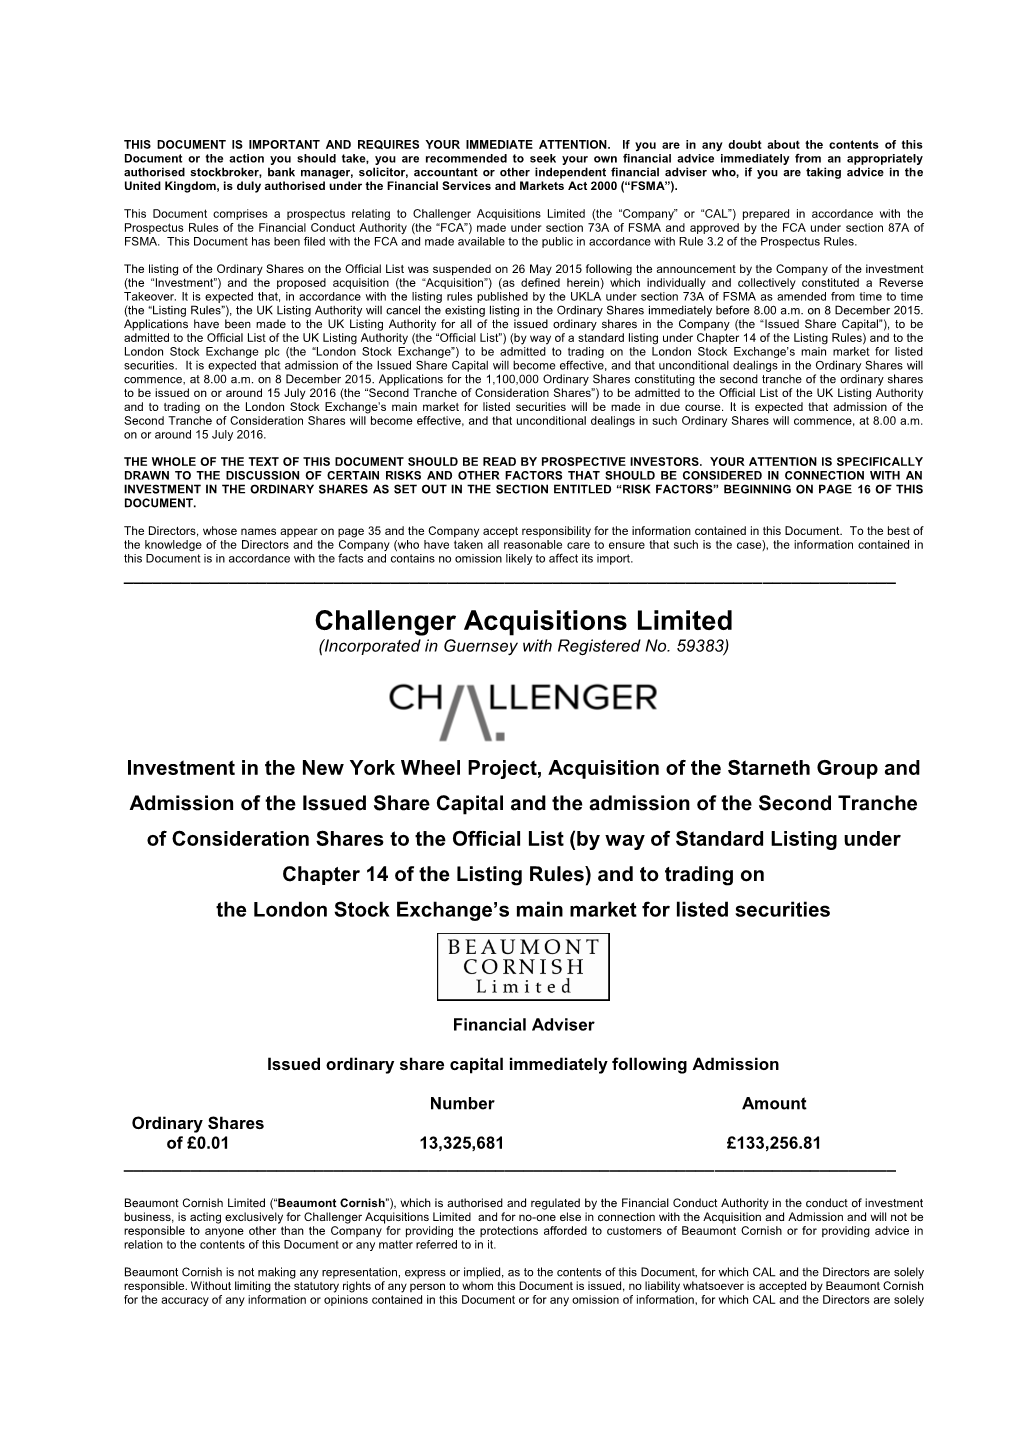 Challenger Acquisitions Limited